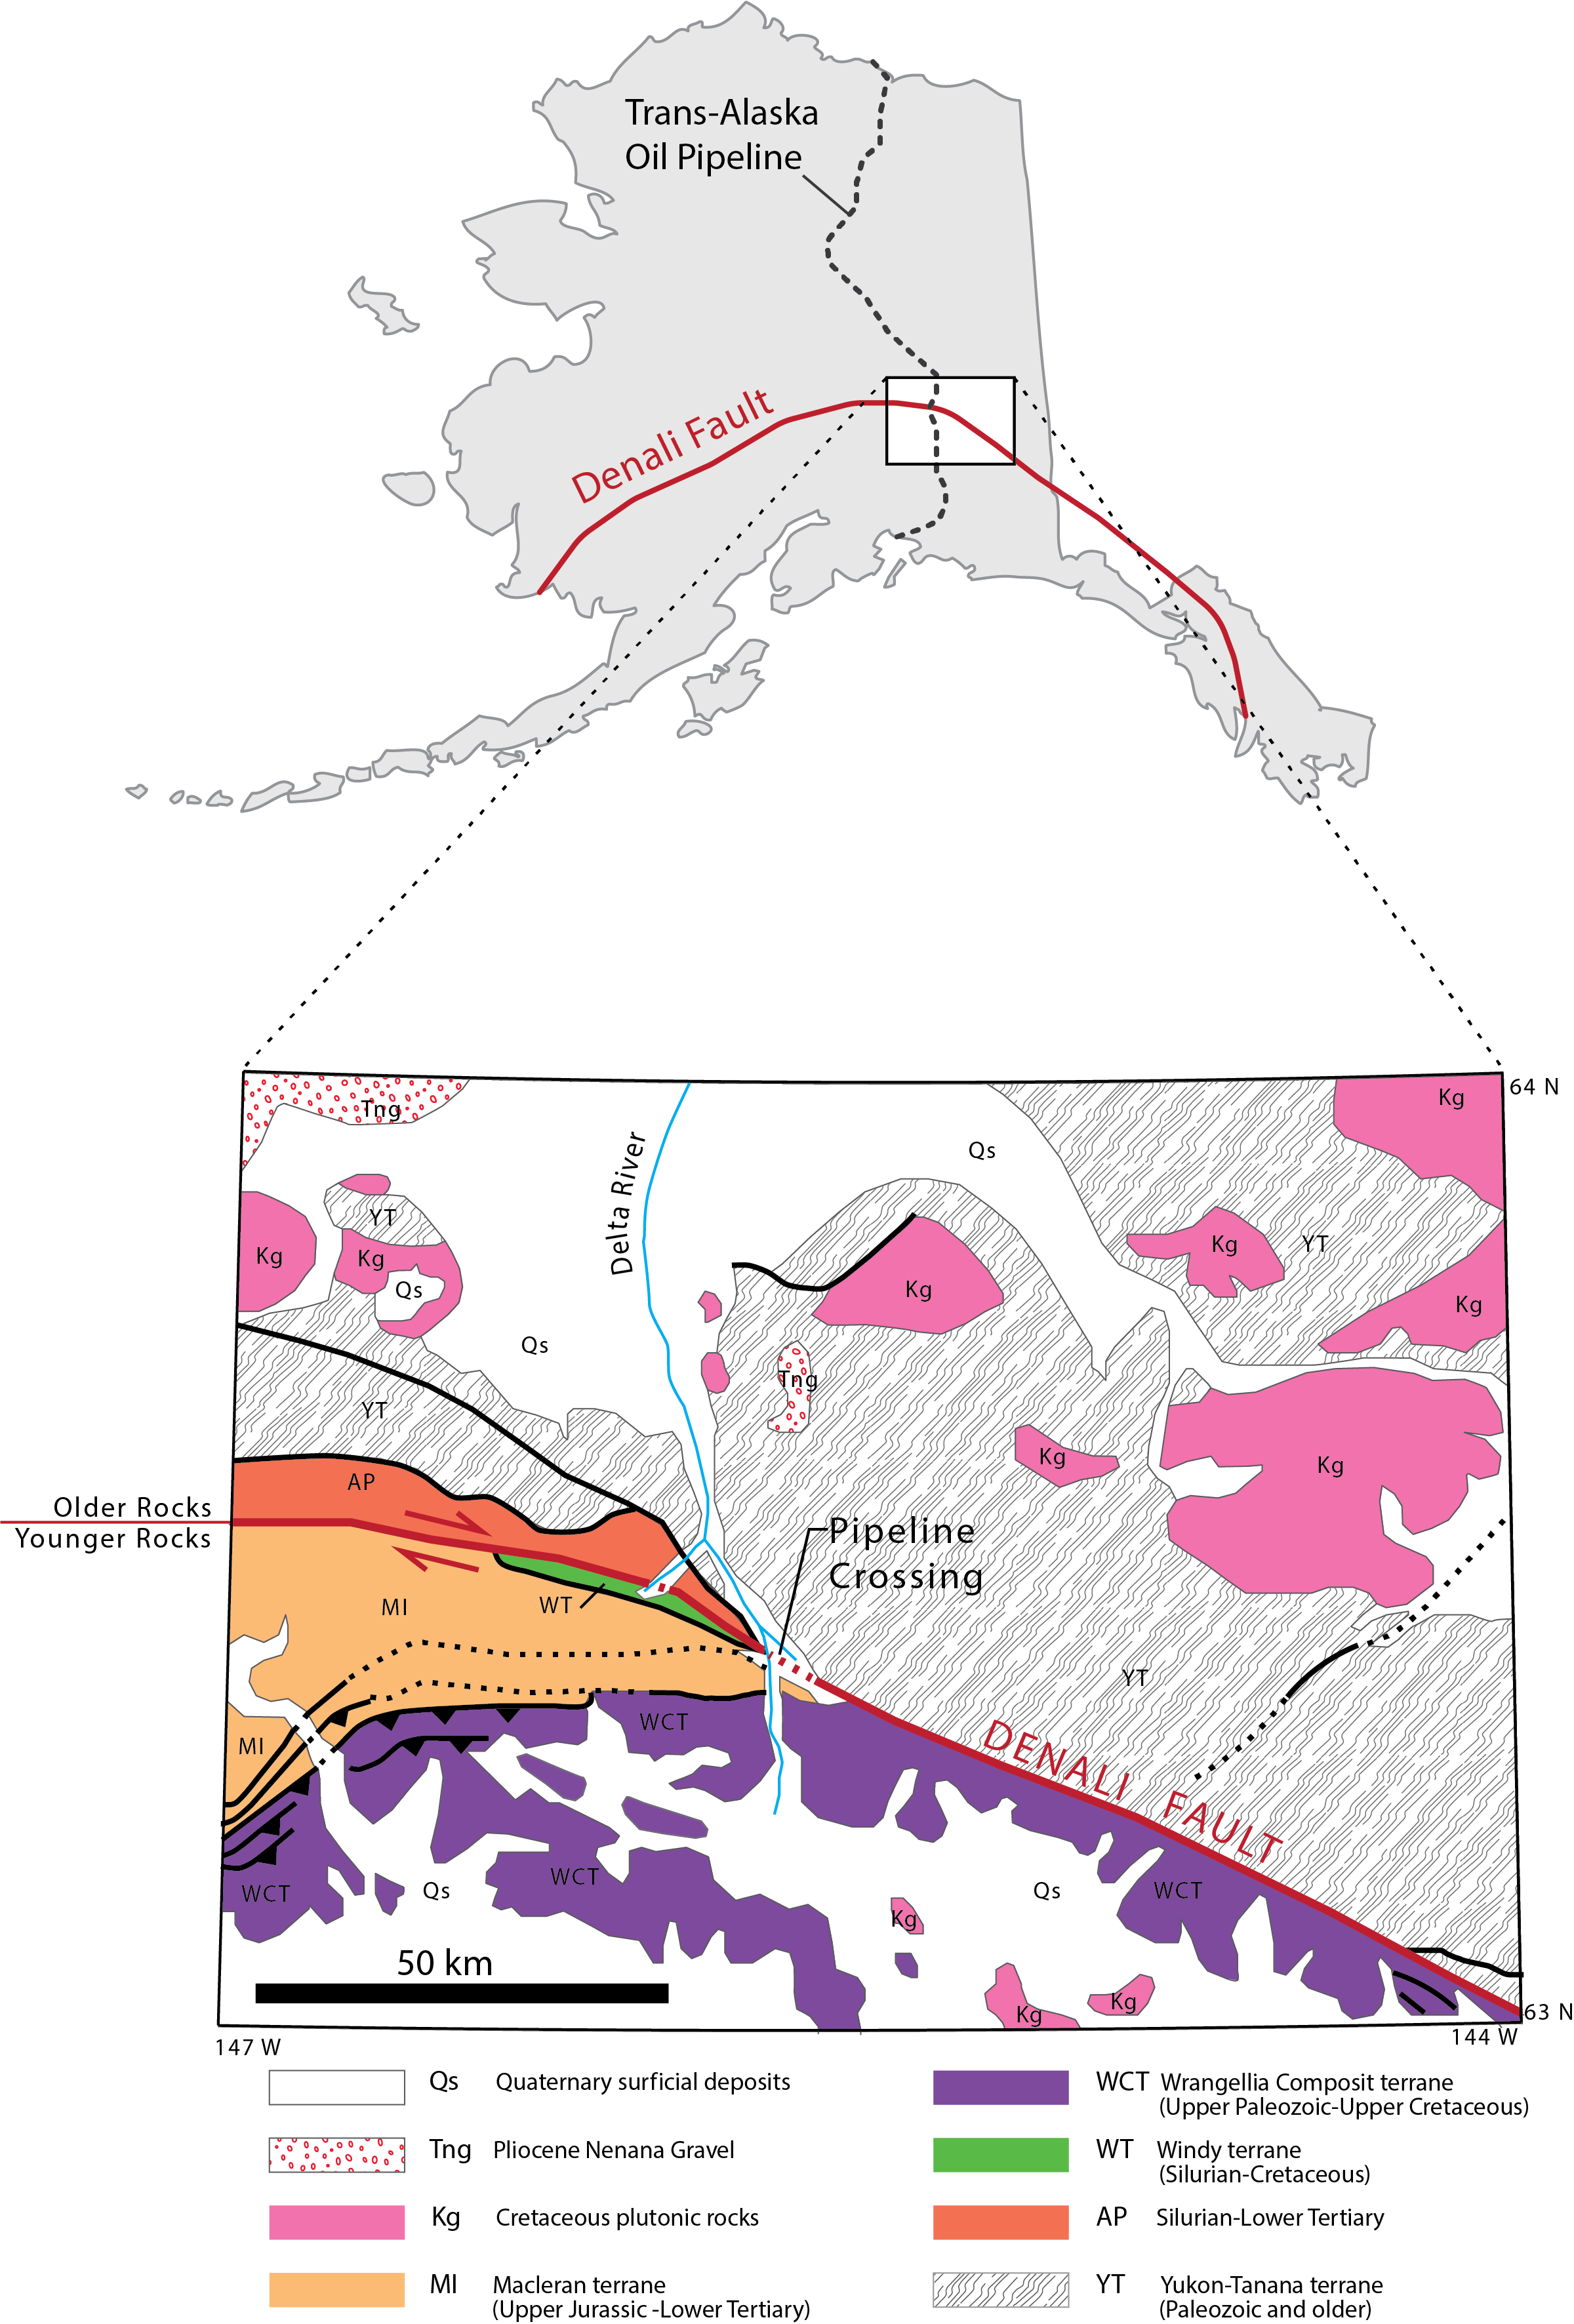 This map shows the geology of the area where the pipeline crosses the Denali fault. Rocks of different types and ages are juxtaposed on either side of the fault Image credit: Map by Abby Ackerman for AGI (2017), modeled after K. Ridgway